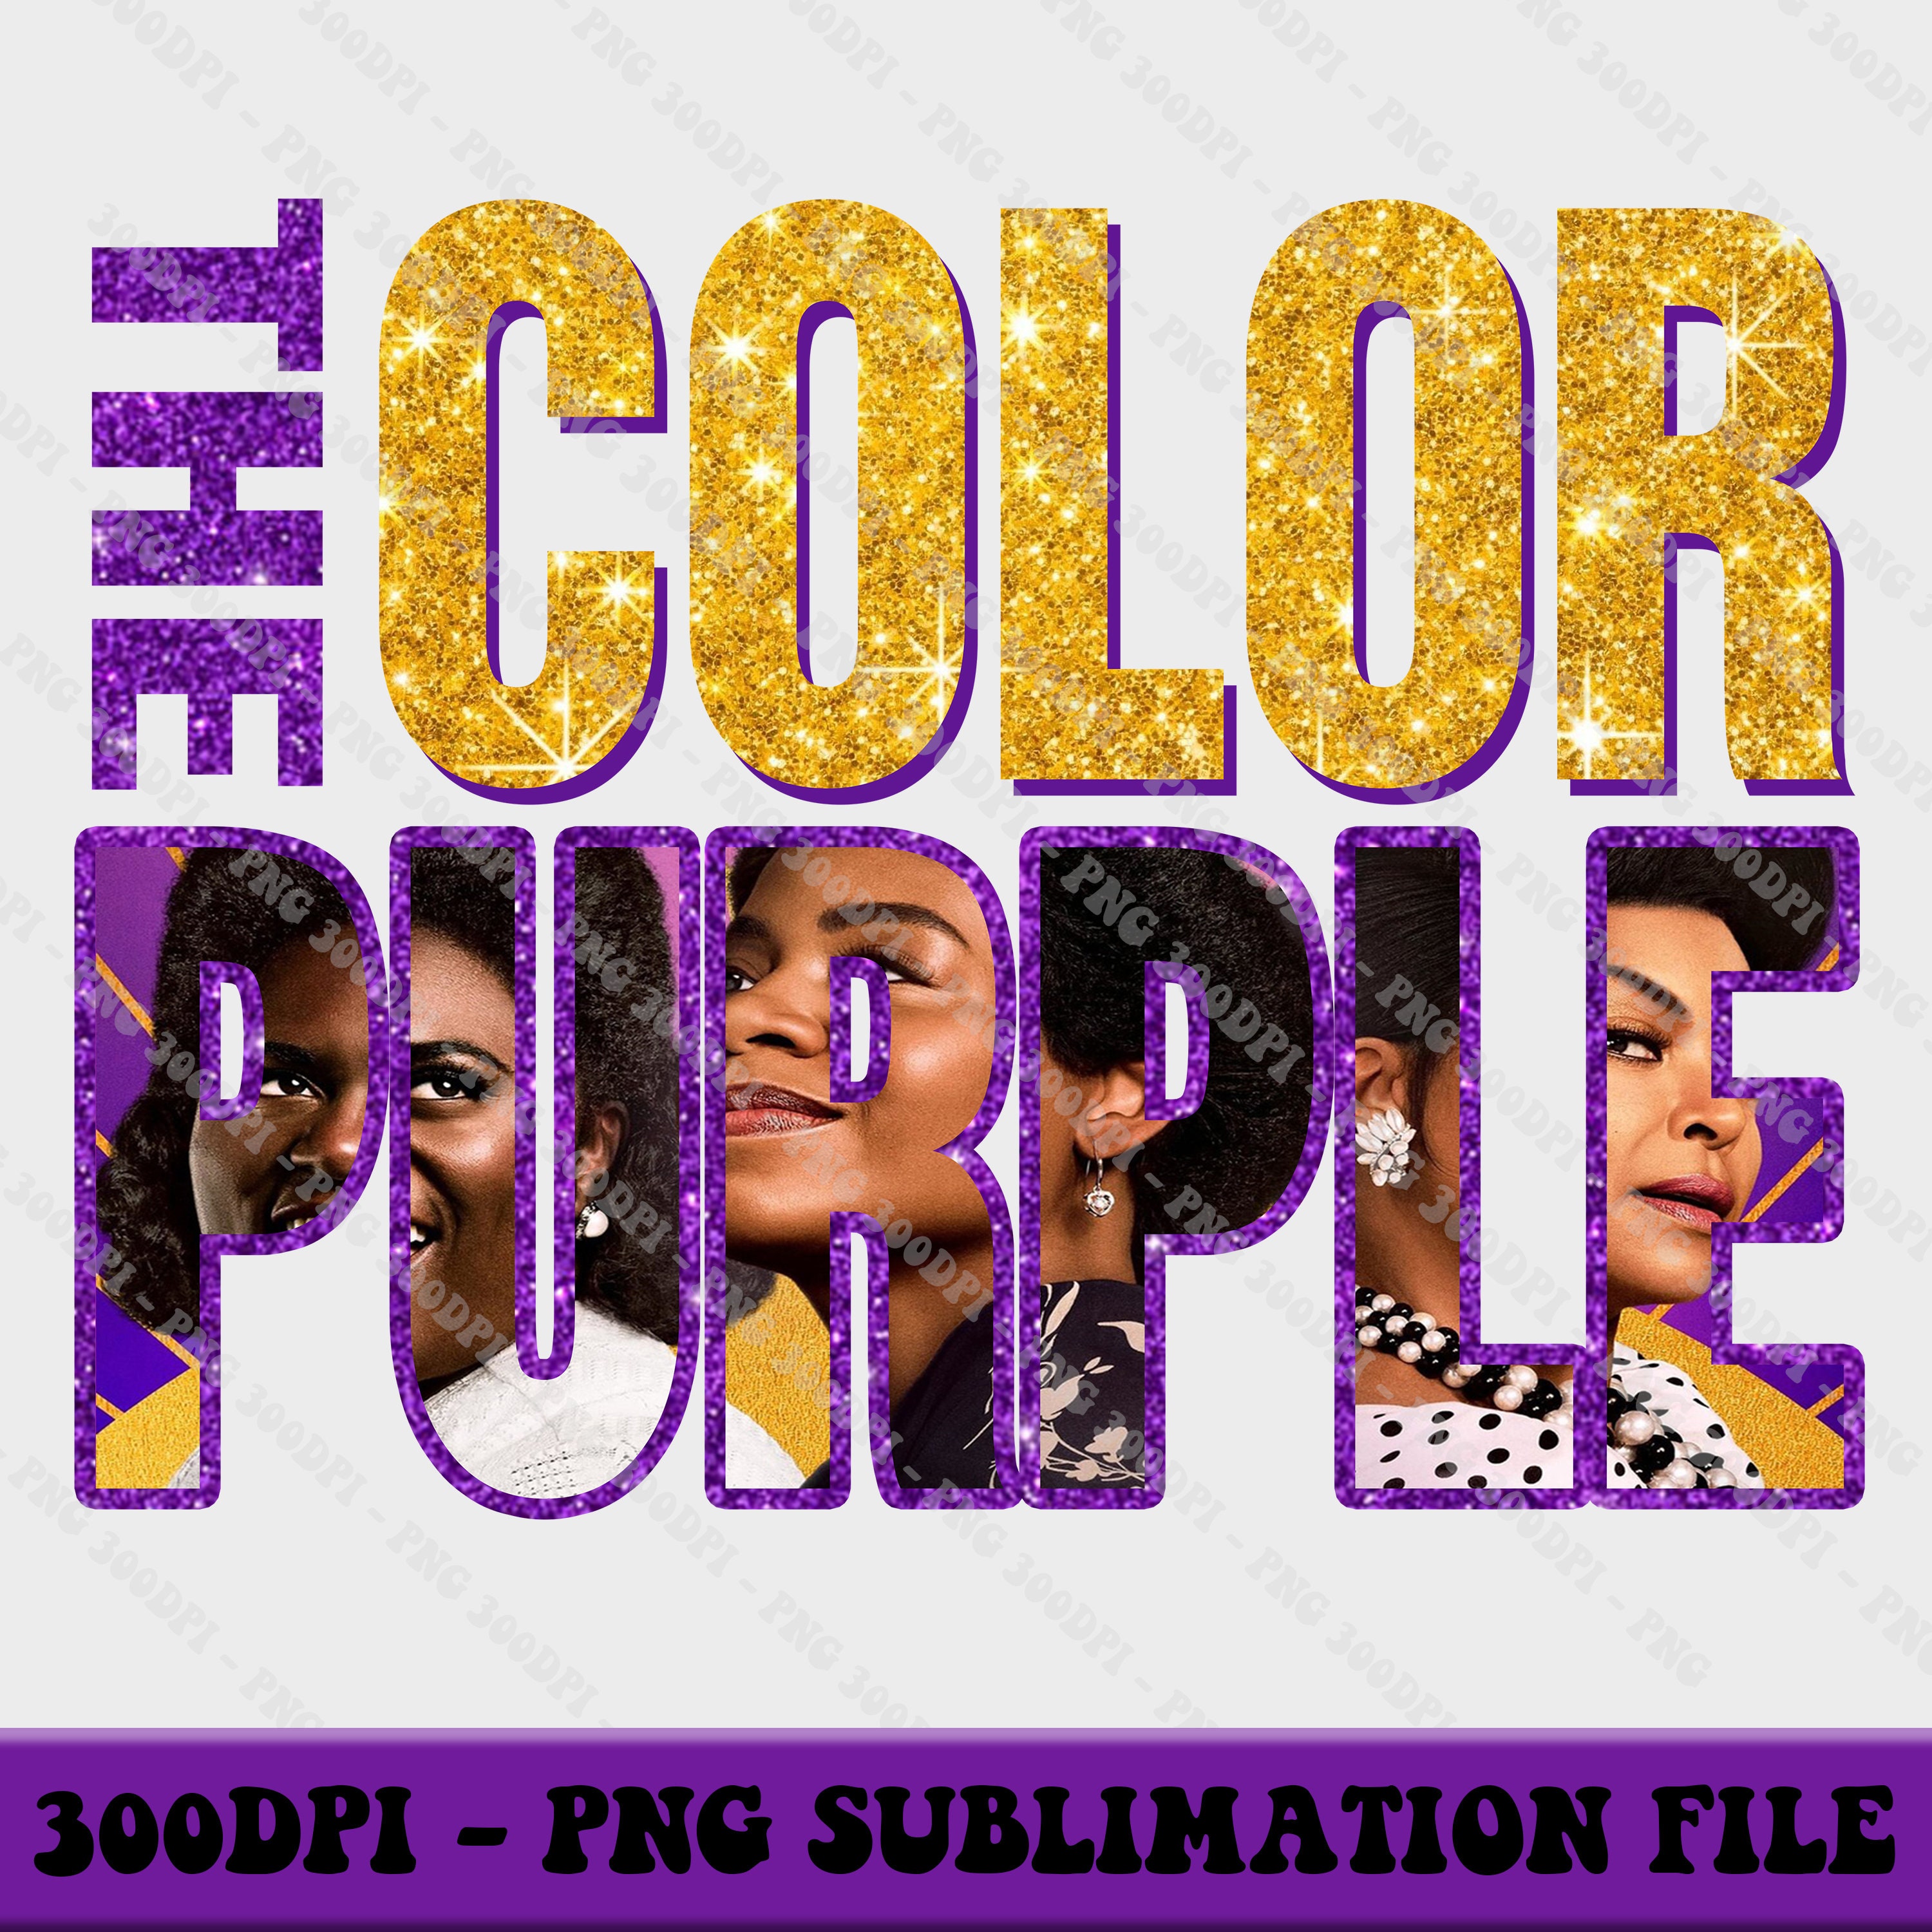 Learn The Color. Purple Objects. Education Set. Illustration Of Primary  Colors. Royalty Free SVG, Cliparts, Vectors, and Stock Illustration. Image  161769685.